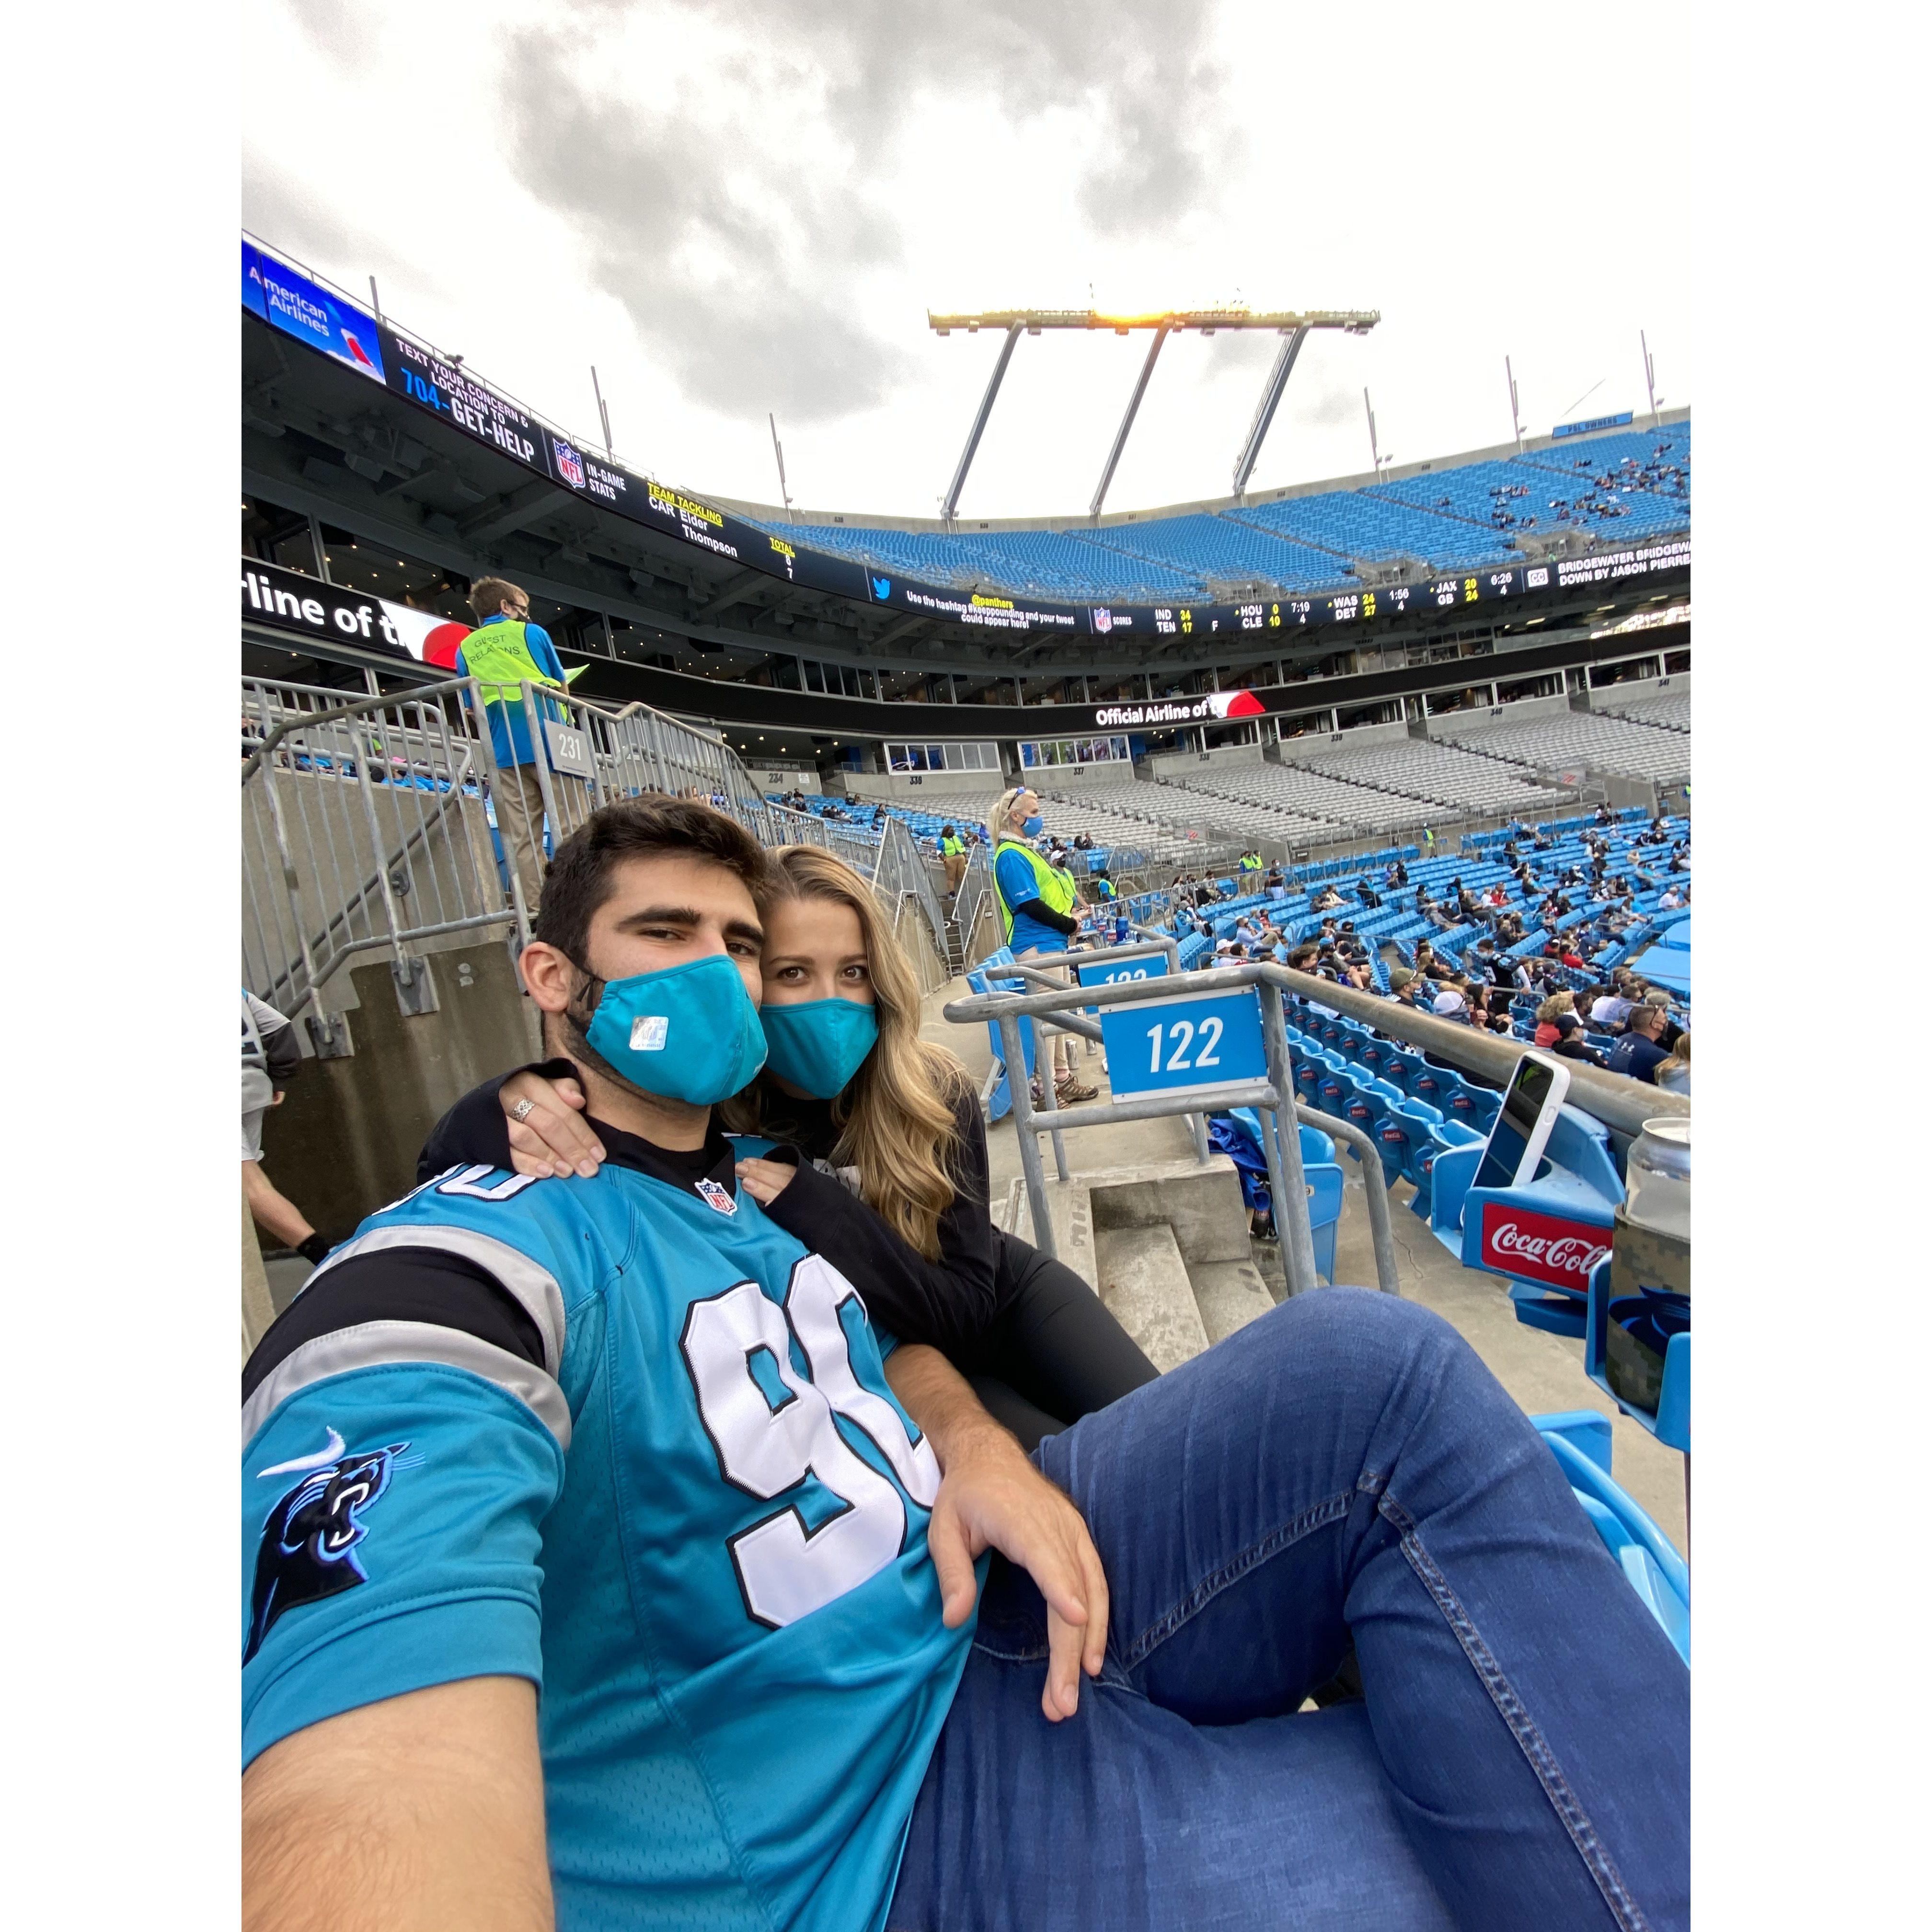 We love going to sporting events any chance we get. This was take in October '20 when we had premium seats (thank you, Katie's boot from surgery). Go 'Thers